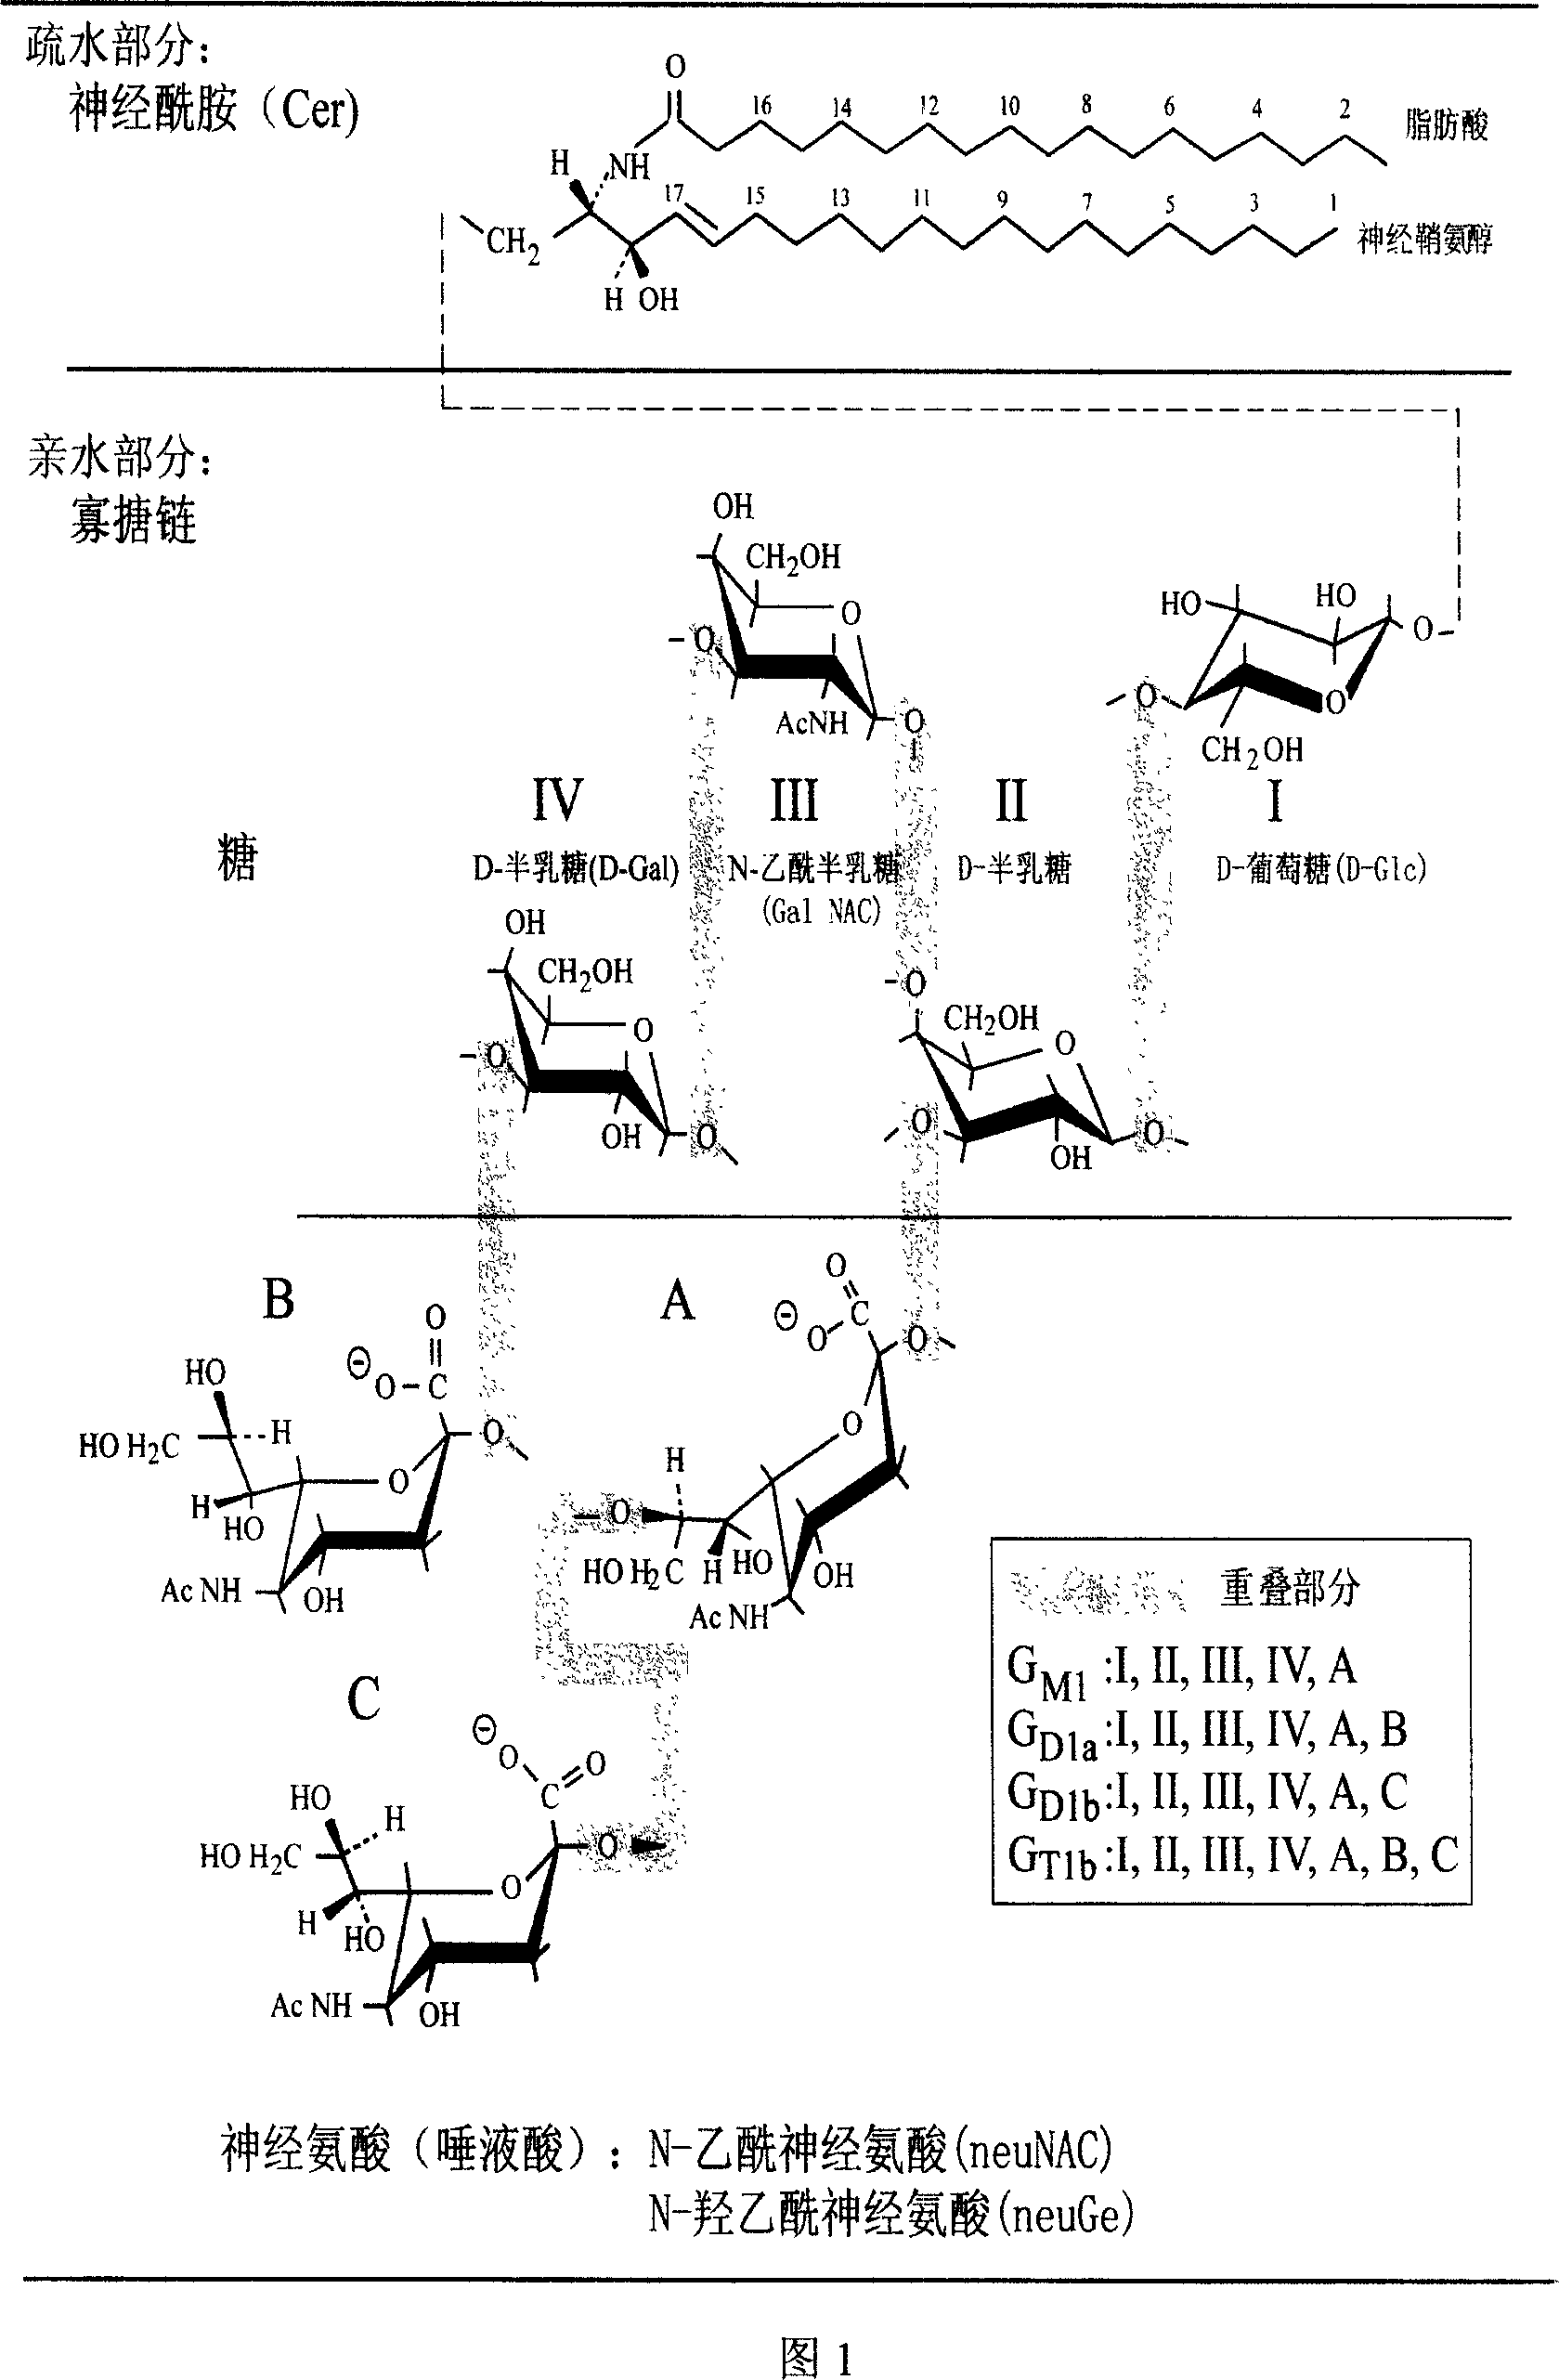 Method for extracting ganglioside with biological activity from animal tissues